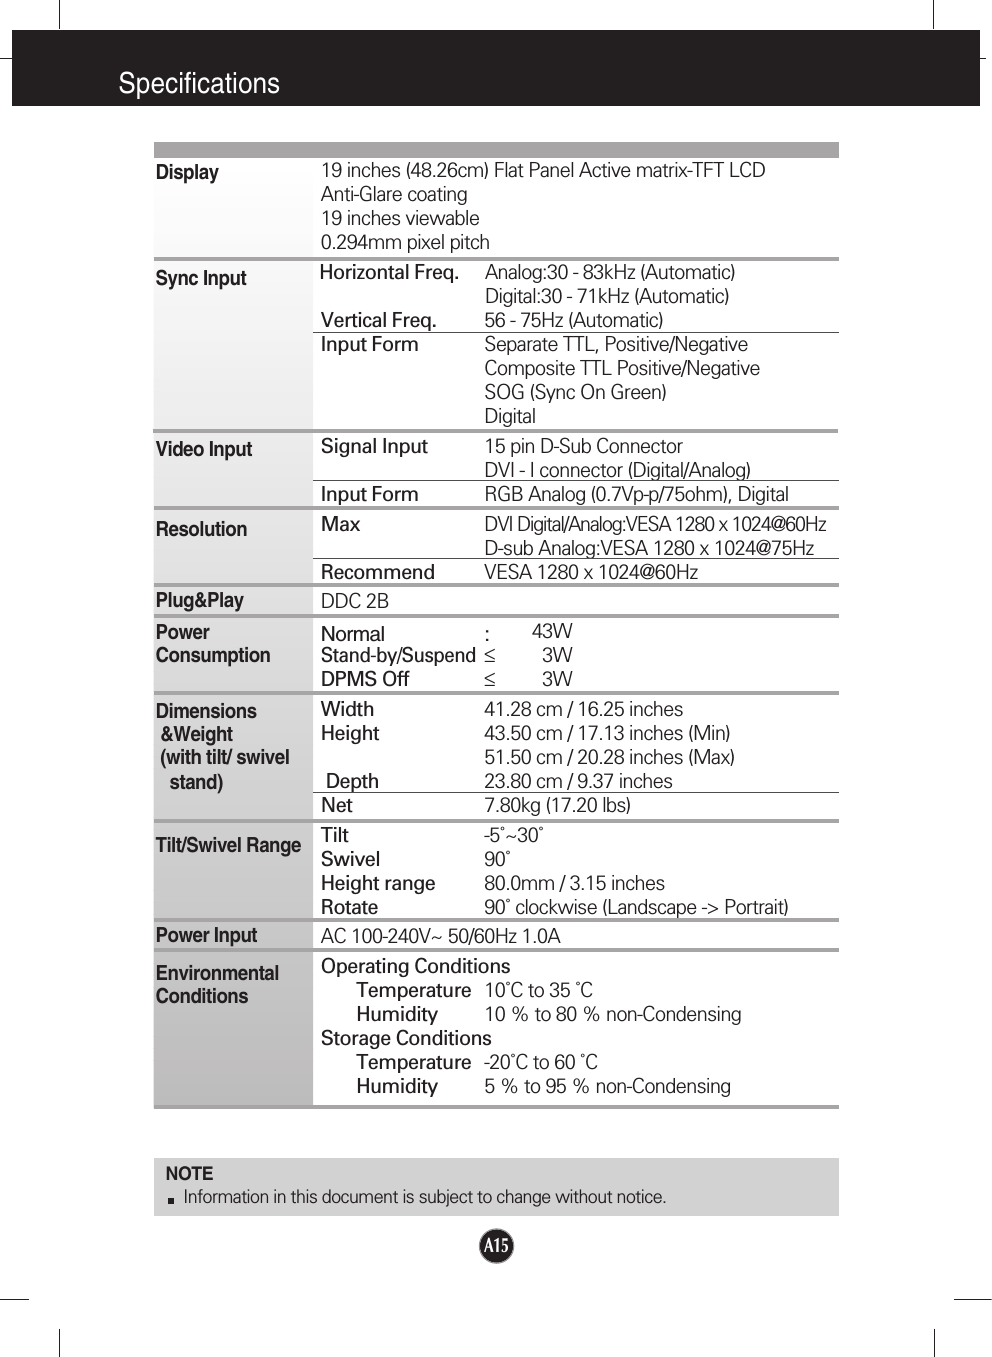 A15SpecificationsNOTEInformation in this document is subject to change without notice.19 inches (48.26cm) Flat Panel Active matrix-TFT LCD Anti-Glare coating19 inches viewable0.294mm pixel pitchHorizontal Freq. Analog:30 - 83kHz (Automatic)Digital:30 - 71kHz (Automatic)Vertical Freq. 56 - 75Hz (Automatic)Input Form Separate TTL, Positive/NegativeComposite TTL Positive/NegativeSOG (Sync On Green) DigitalSignal Input 15 pin D-Sub ConnectorDVI - I connector (Digital/Analog)Input Form RGB Analog (0.7Vp-p/75ohm), DigitalMaxDVI Digital/Analog:VESA 1280 x 1024@60HzD-sub Analog:VESA 1280 x 1024@75Hz Recommend VESA 1280 x 1024@60HzDDC 2BNormal :43WStand-by/Suspend≤3WDPMS Off ≤3WWidth 41.28 cm / 16.25 inchesHeight 43.50 cm / 17.13 inches (Min)51.50 cm / 20.28 inches (Max)Depth 23.80 cm / 9.37 inchesNet 7.80kg (17.20 lbs)Tilt -5˚~30˚Swivel 90˚Height range 80.0mm / 3.15 inchesRotate 90˚ clockwise (Landscape -&gt; Portrait)AC 100-240V~ 50/60Hz 1.0AOperating ConditionsTemperature 10˚C to 35 ˚CHumidity 10 % to 80 % non-CondensingStorage ConditionsTemperature -20˚C to 60 ˚CHumidity 5 % to 95 % non-CondensingDisplaySync InputVideo InputResolutionPlug&amp;PlayPowerConsumptionDimensions&amp;Weight(with tilt/ swivel       stand)Tilt/Swivel RangePower InputEnvironmentalConditions